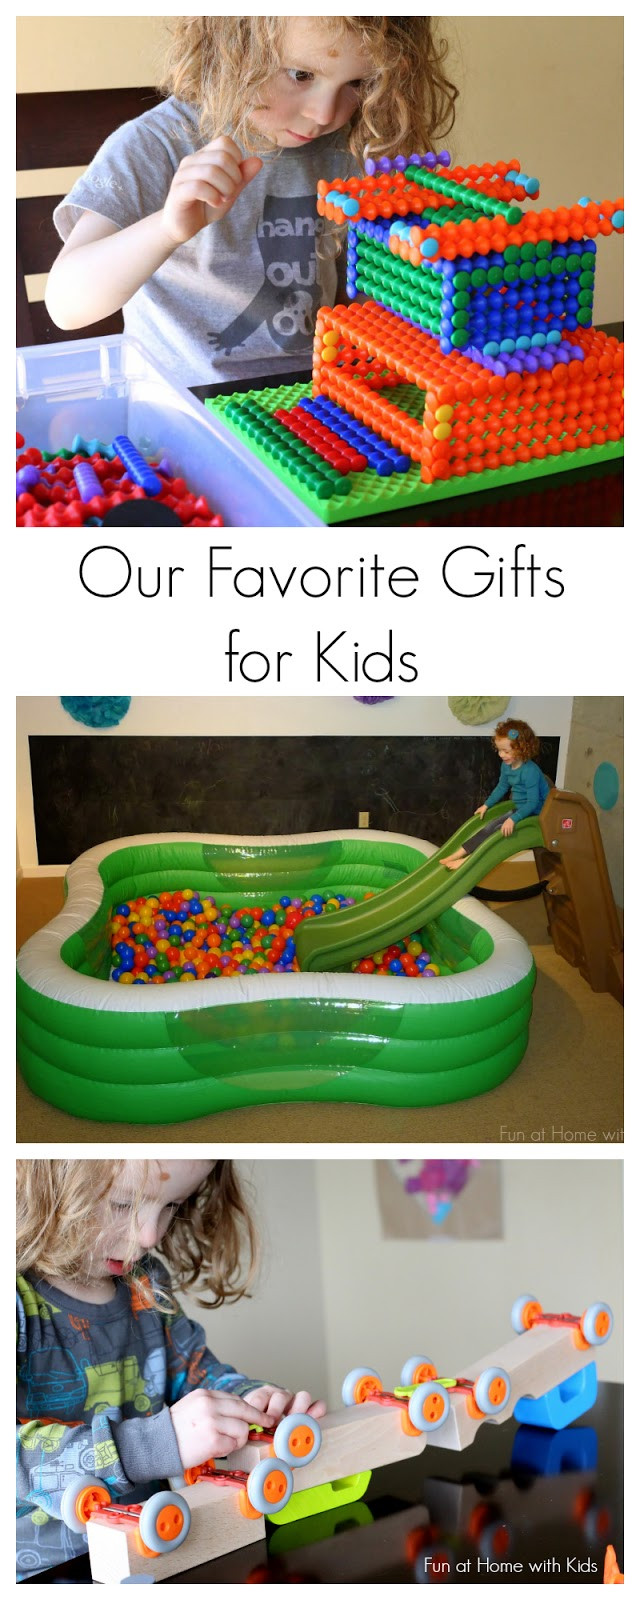 Awesome Birthday Gifts For Kids
 Our 10 Best and Favorite Gift Ideas for Kids